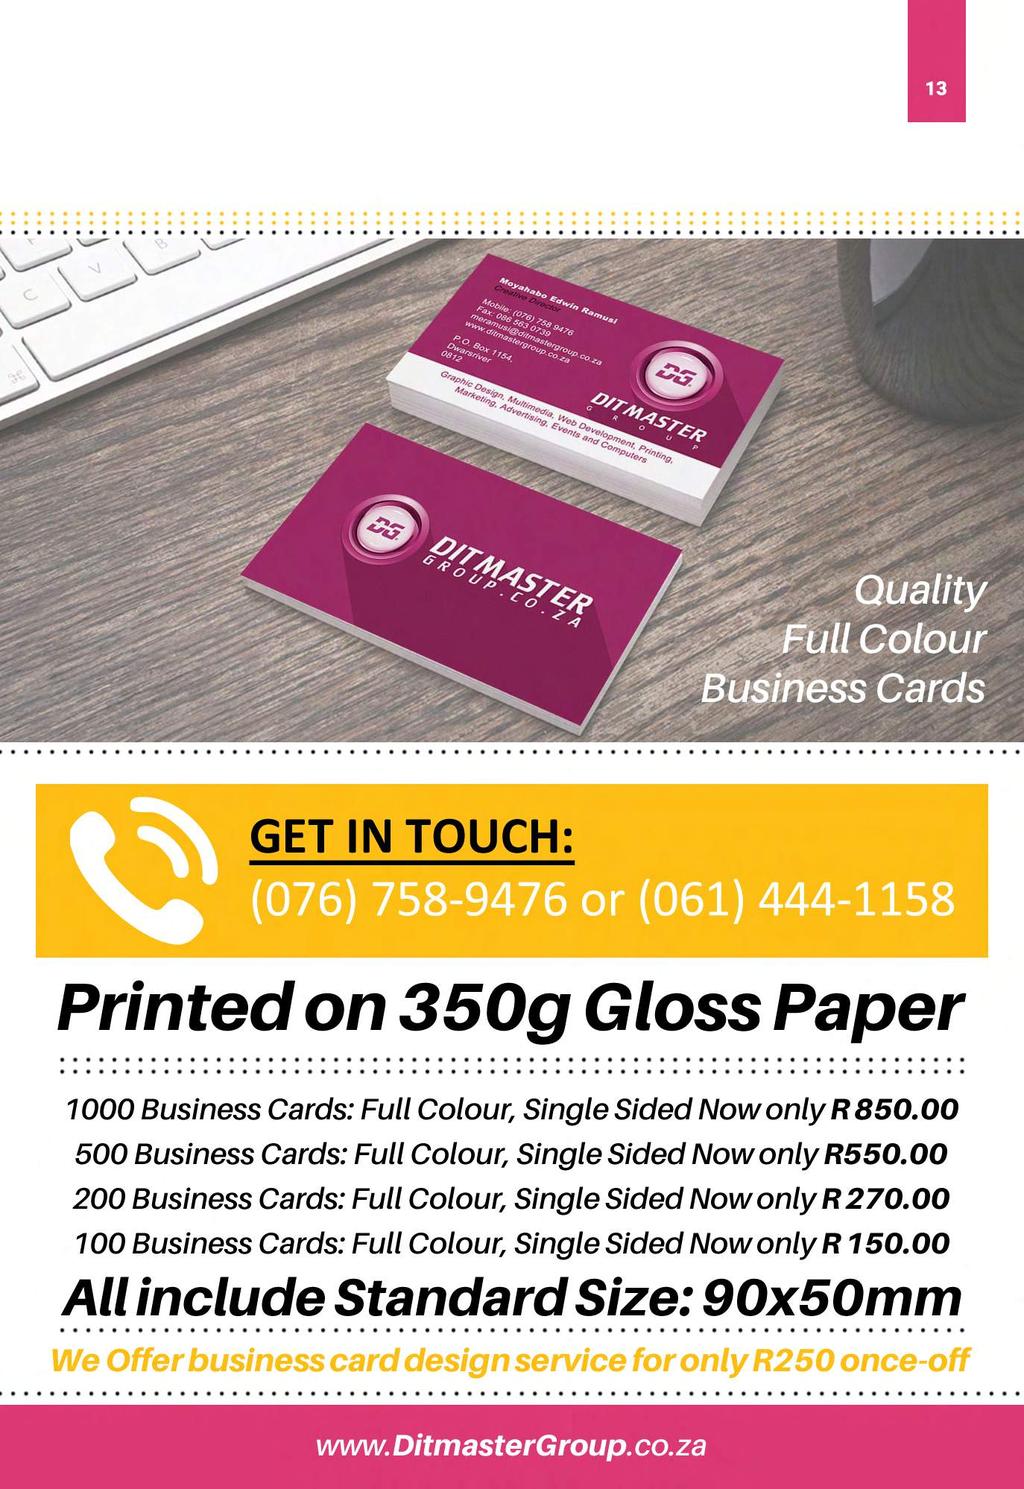 13 Quality Full Colour Business Cards GET IN TOUCH: (076) 758-9476 or (061) 444-1158 Printed on 350g Gloss Paper 1000 Business Cards: Full Colour, Single Sided Now only R 850.